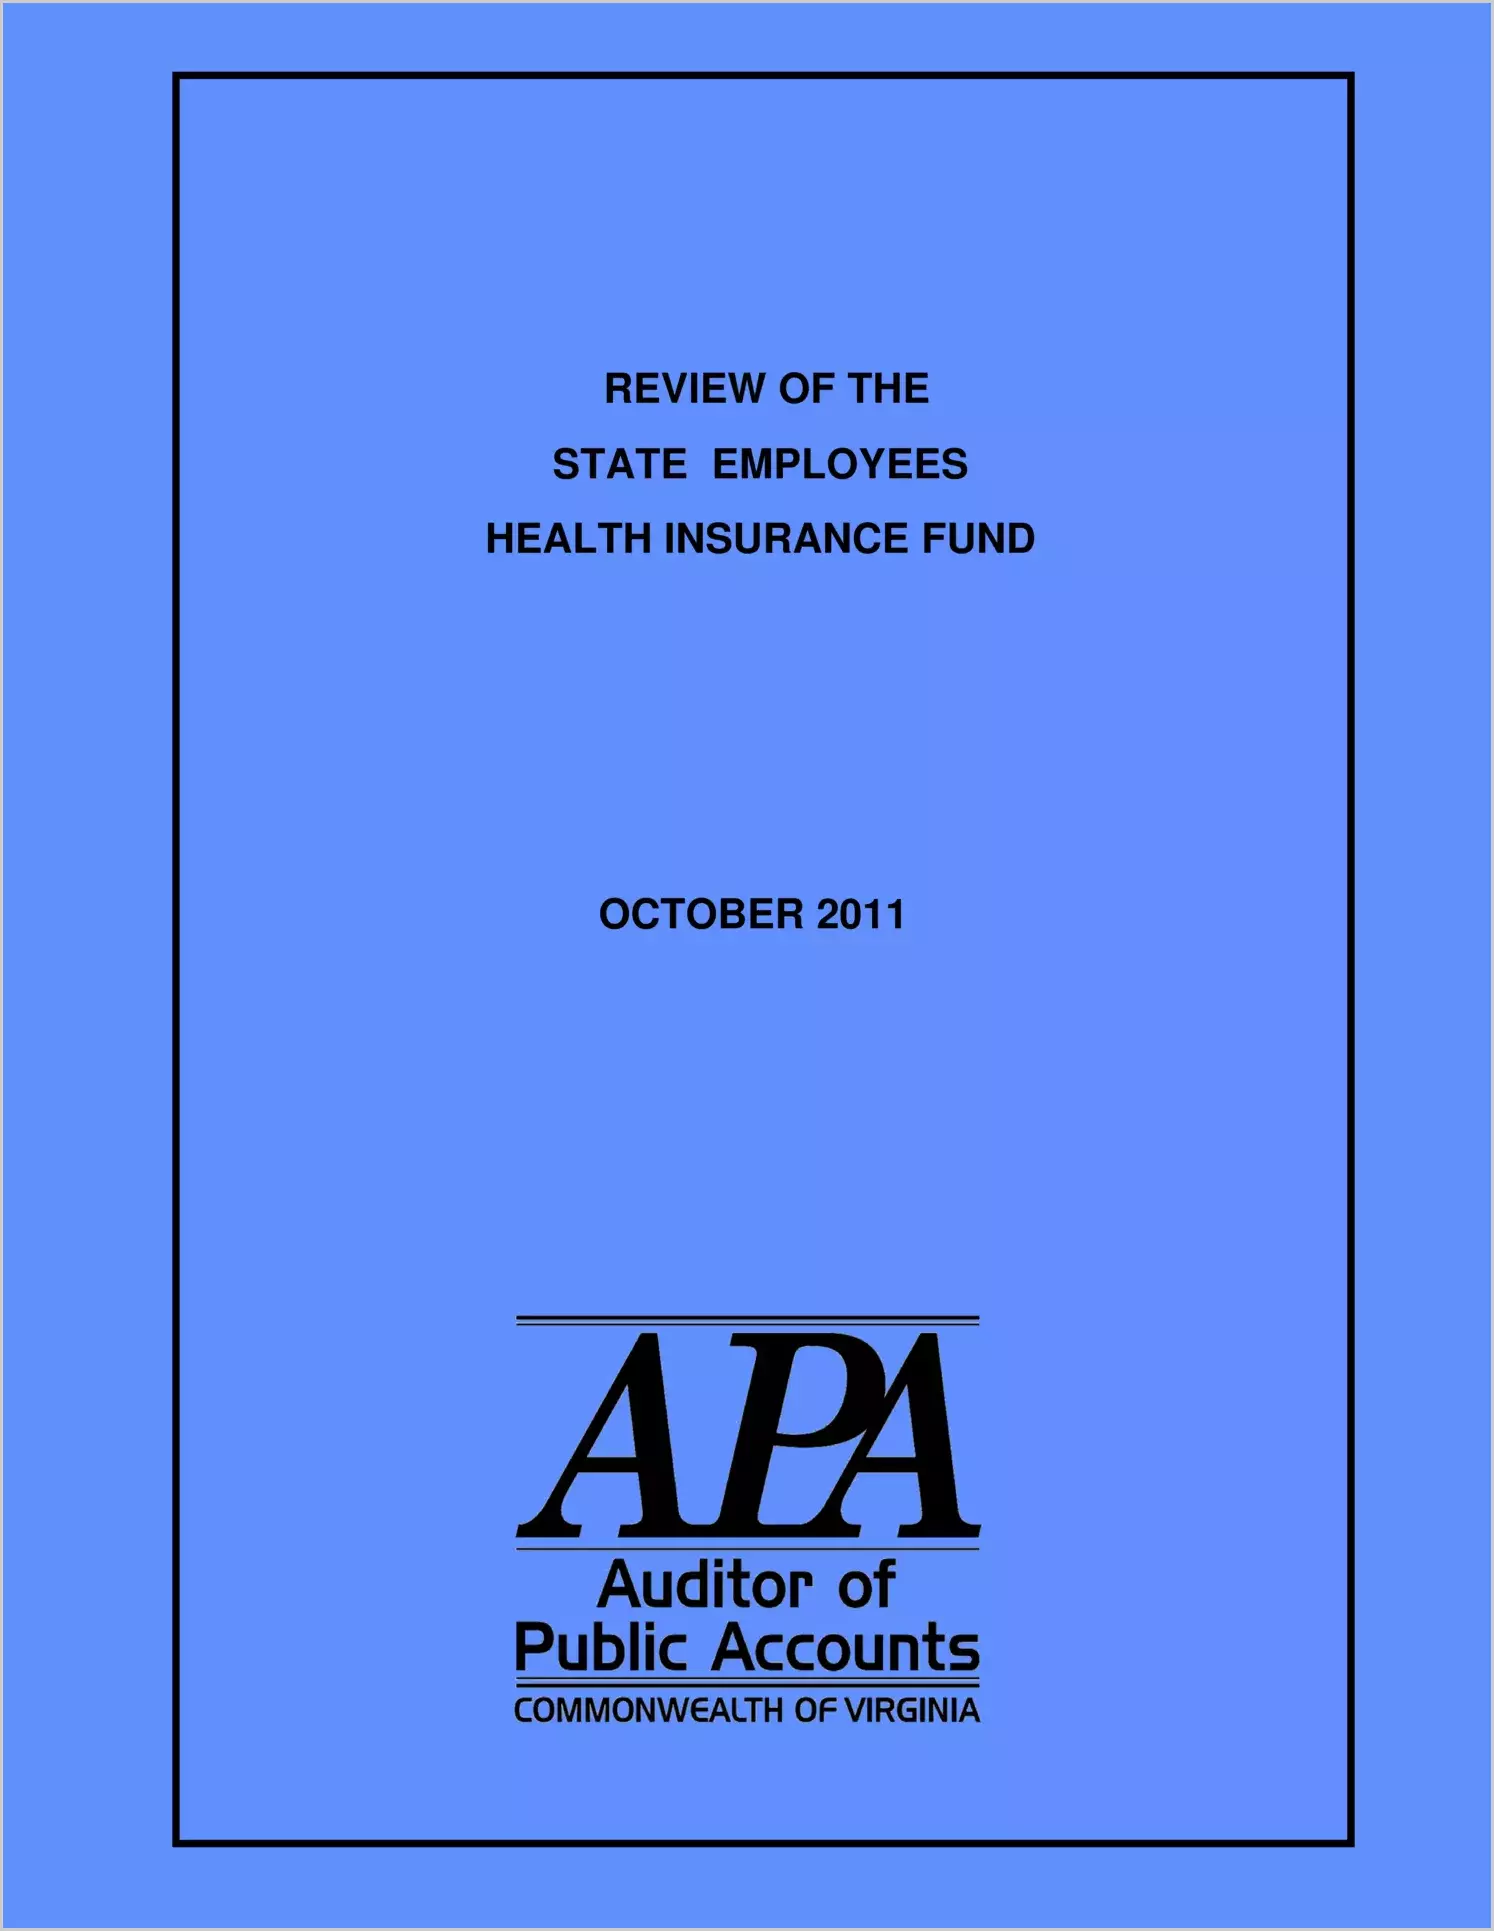 Review of the State Employees Health Insurance Fund